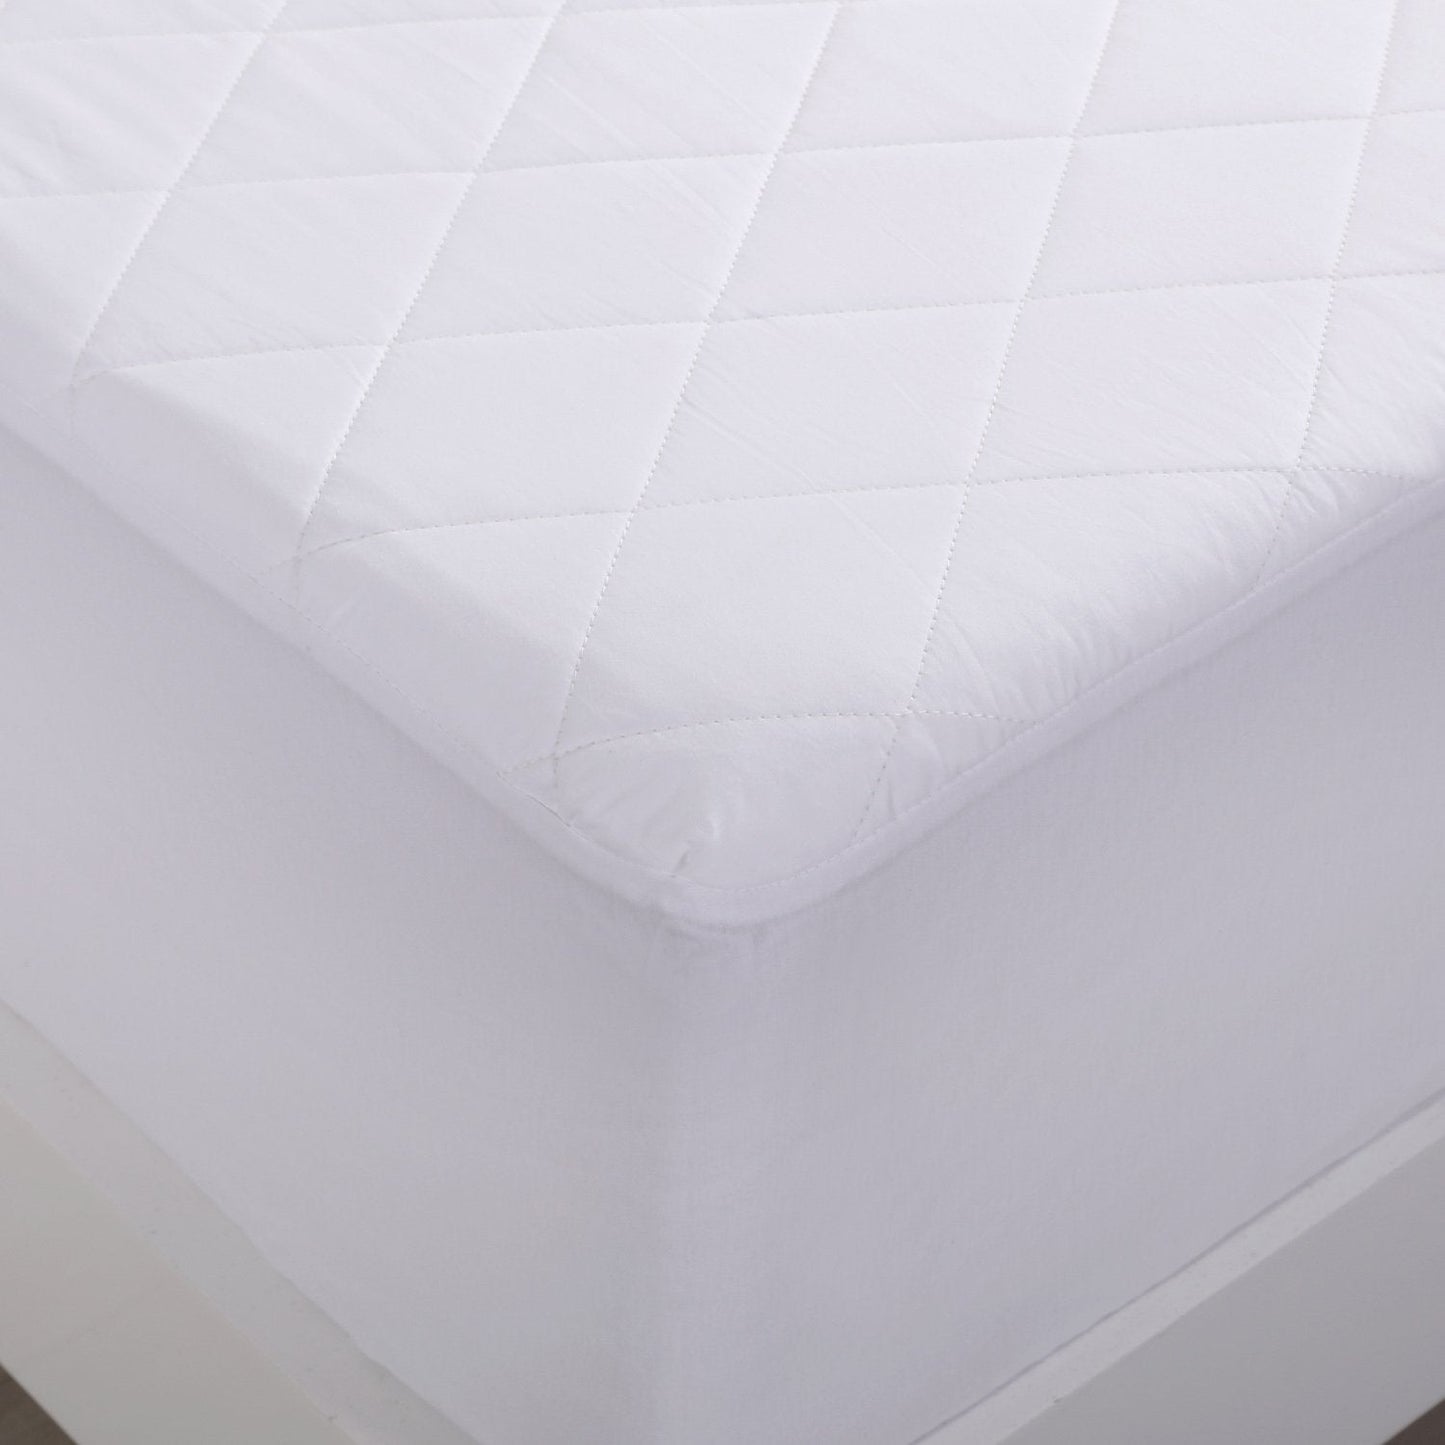 Comfort in Cotton Quilted Mattress Protector by Bianca